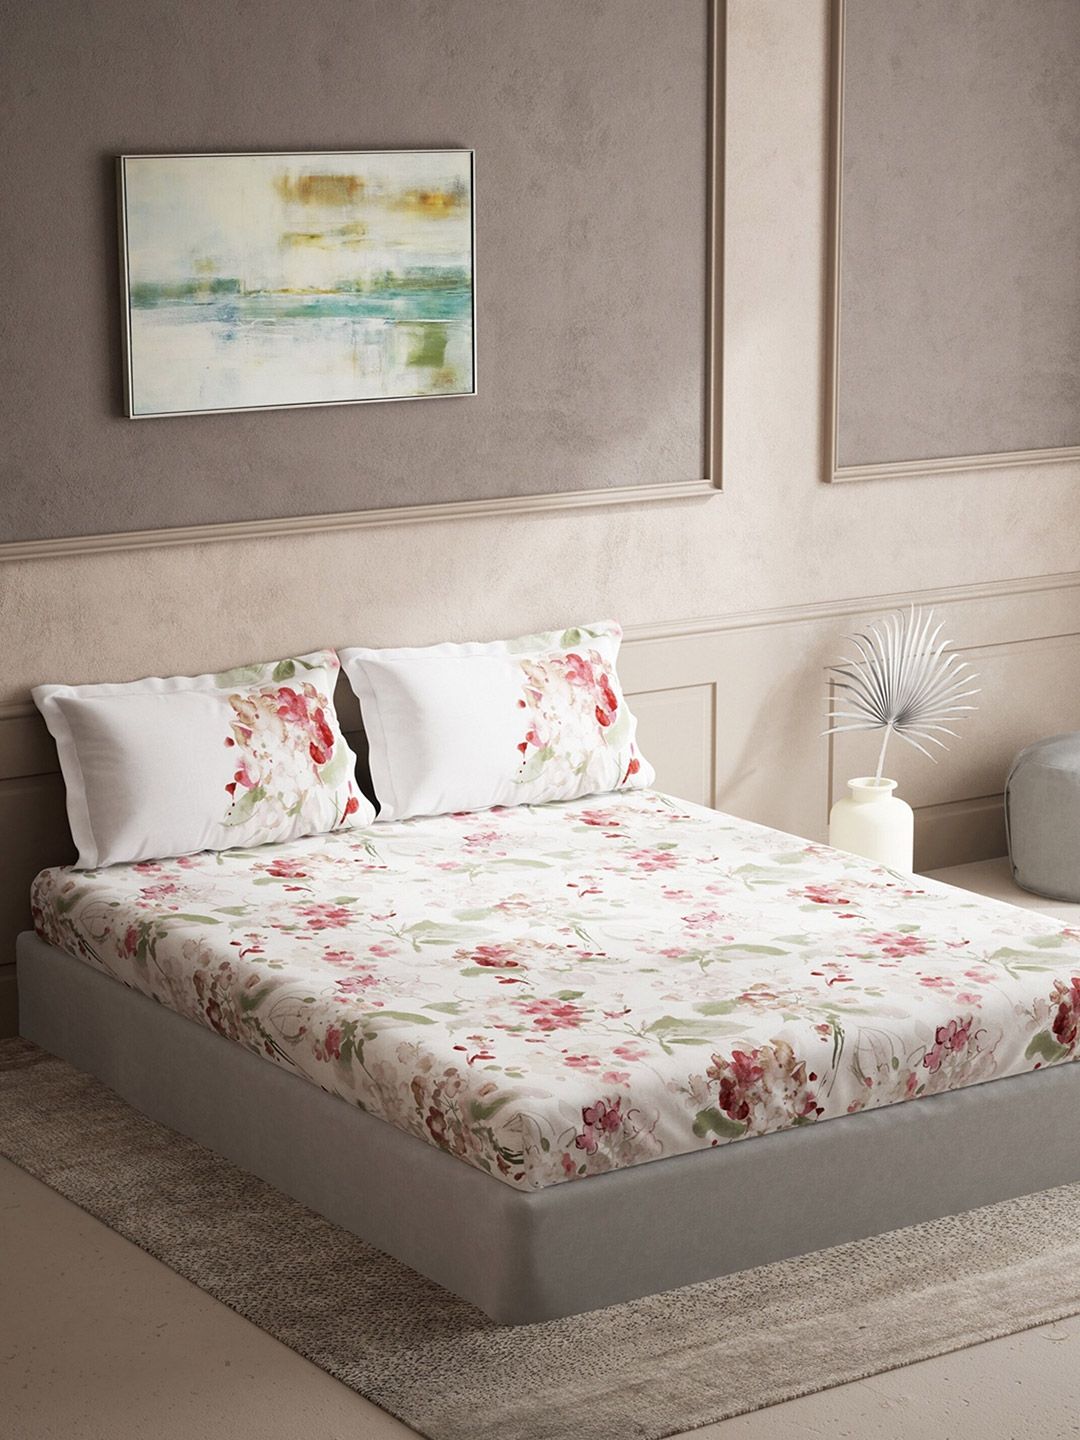 DDecor White & Pink Floral Printed Cotton 144 TC King Bedsheet with 2 Pillow Covers Price in India